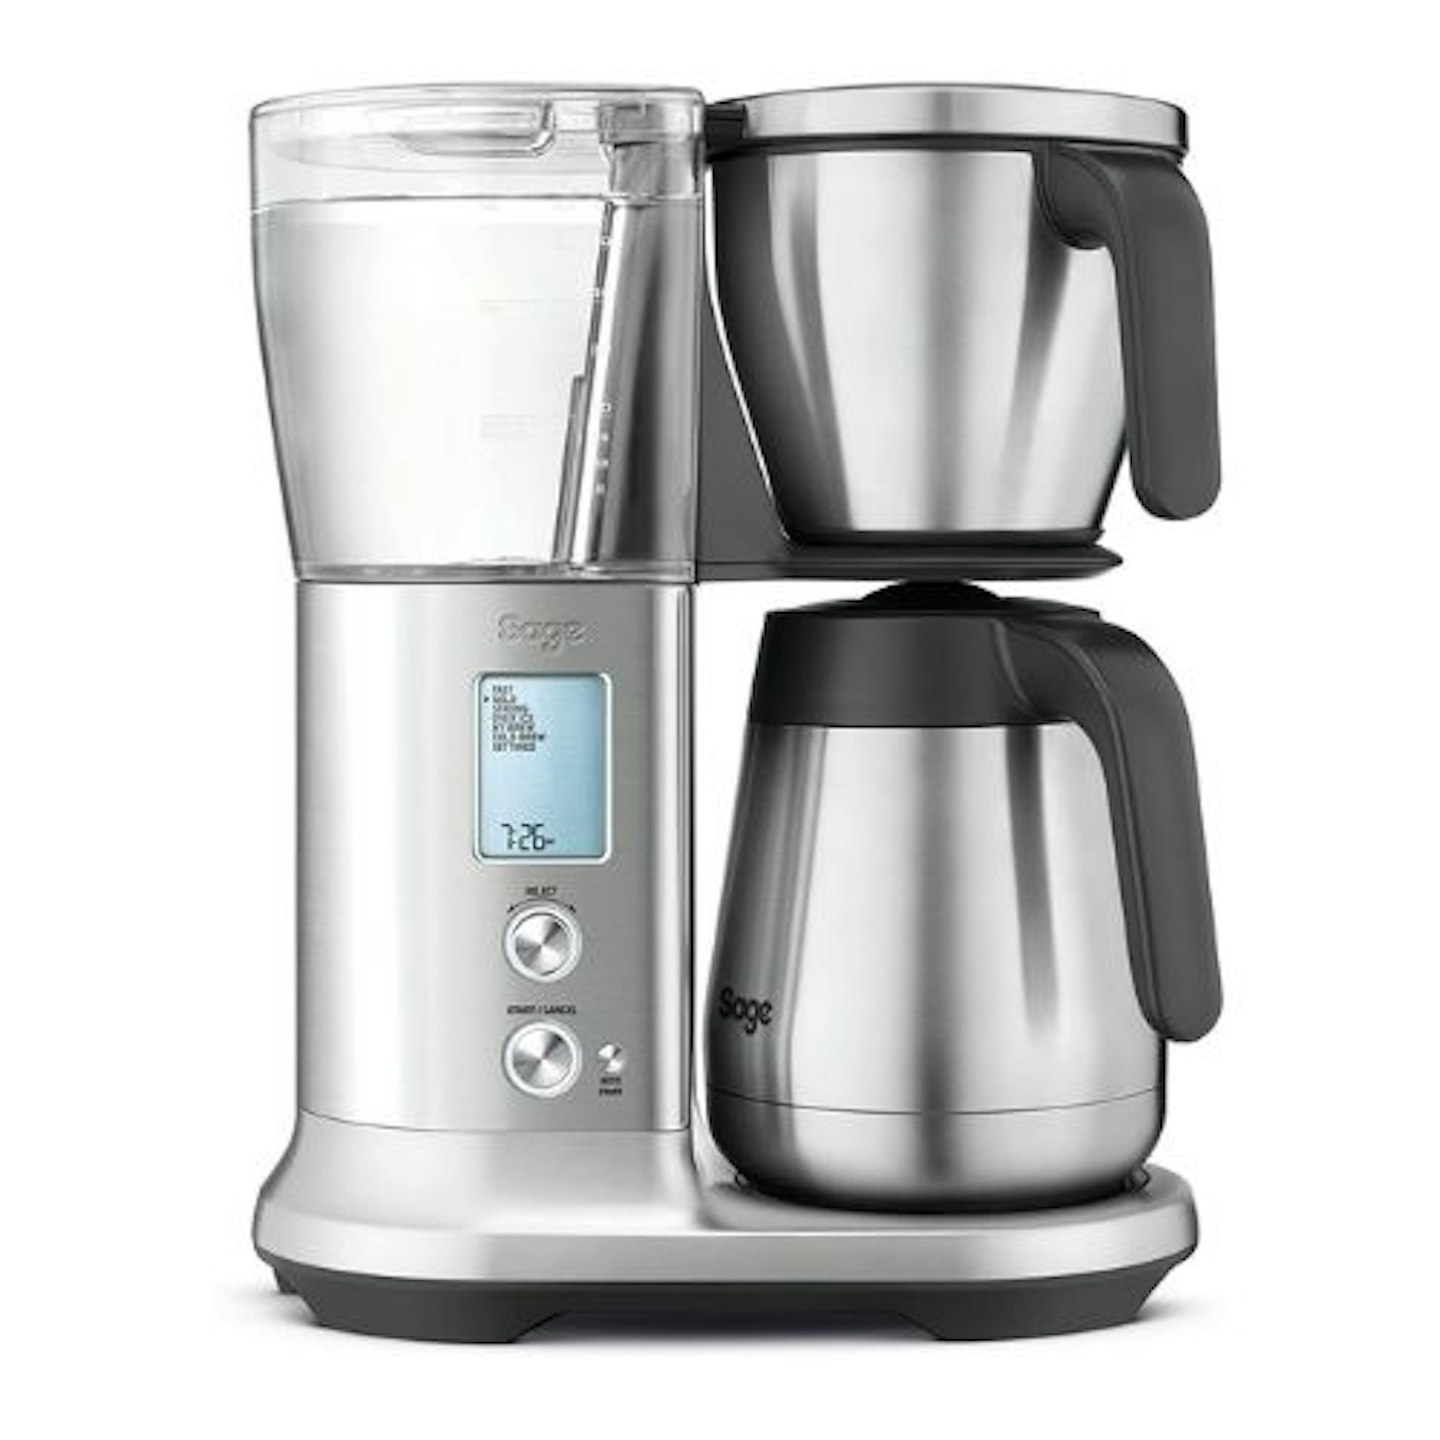 Sage SDC450BSS the Precision Brewer Coffee Maker